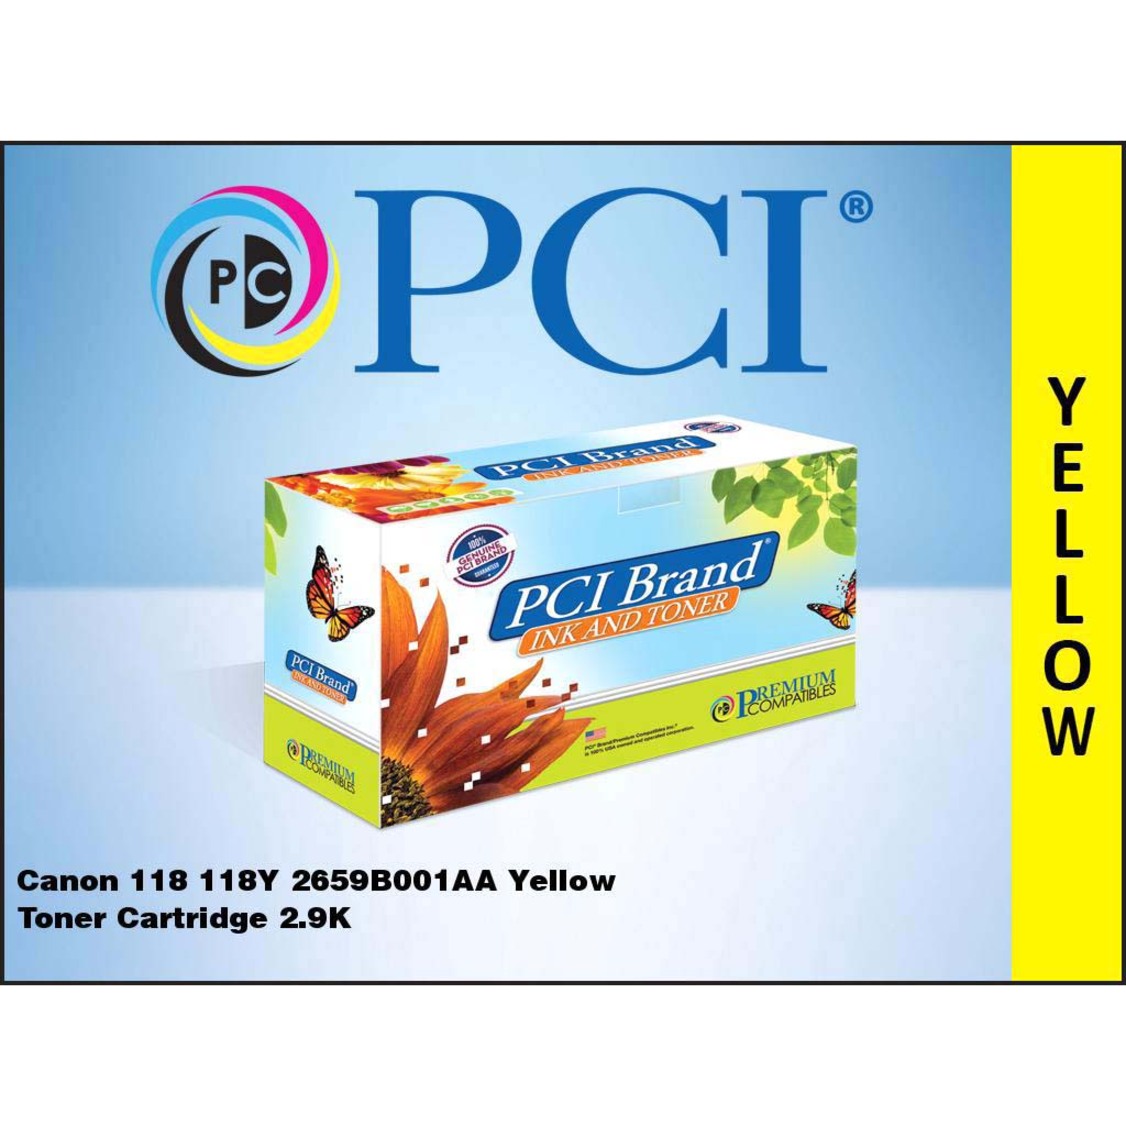 Premium Compatibles 2659B001AA-PCI Canon 118 Yellow Toner Cartridge, 2.9K Yield, Made in the USA